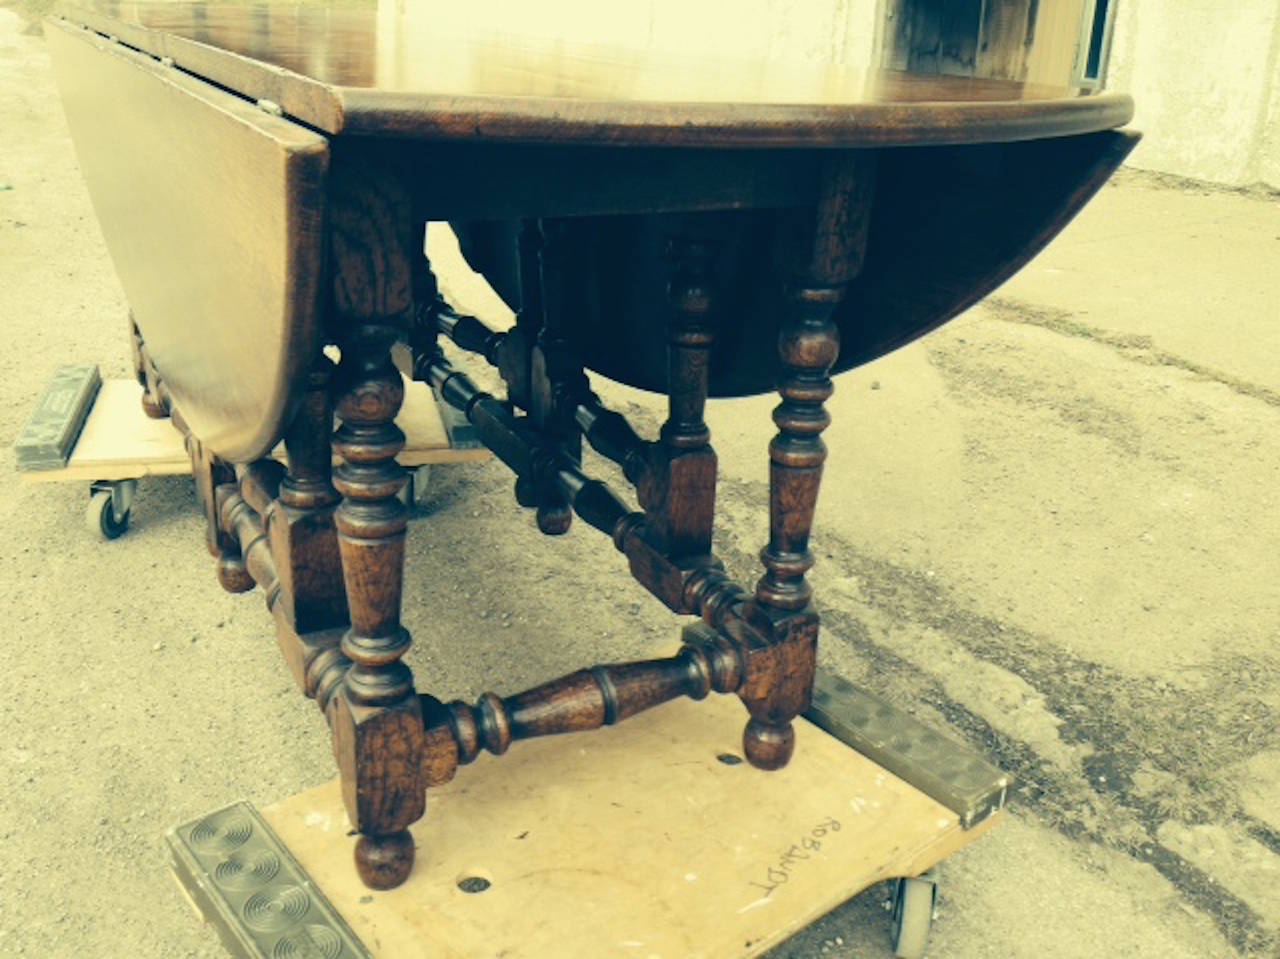 English, Handcrafted 17th Century Style Drop-Leaf Table In Excellent Condition For Sale In Buchanan, MI